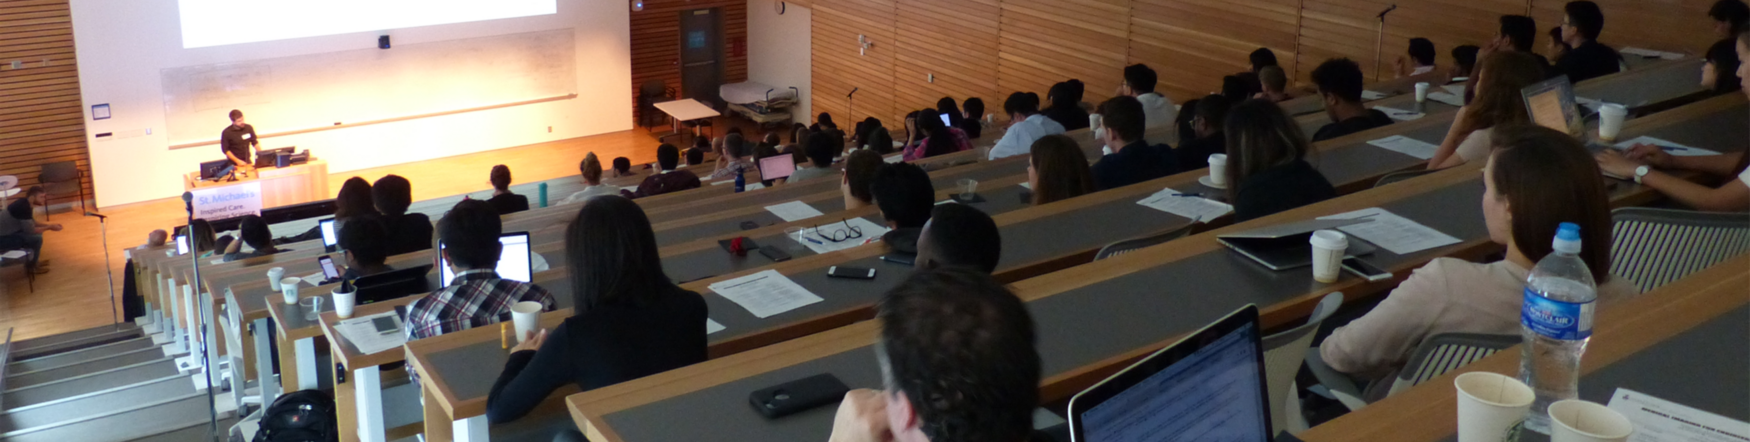 Photograph of a lecture room with presenter and audience